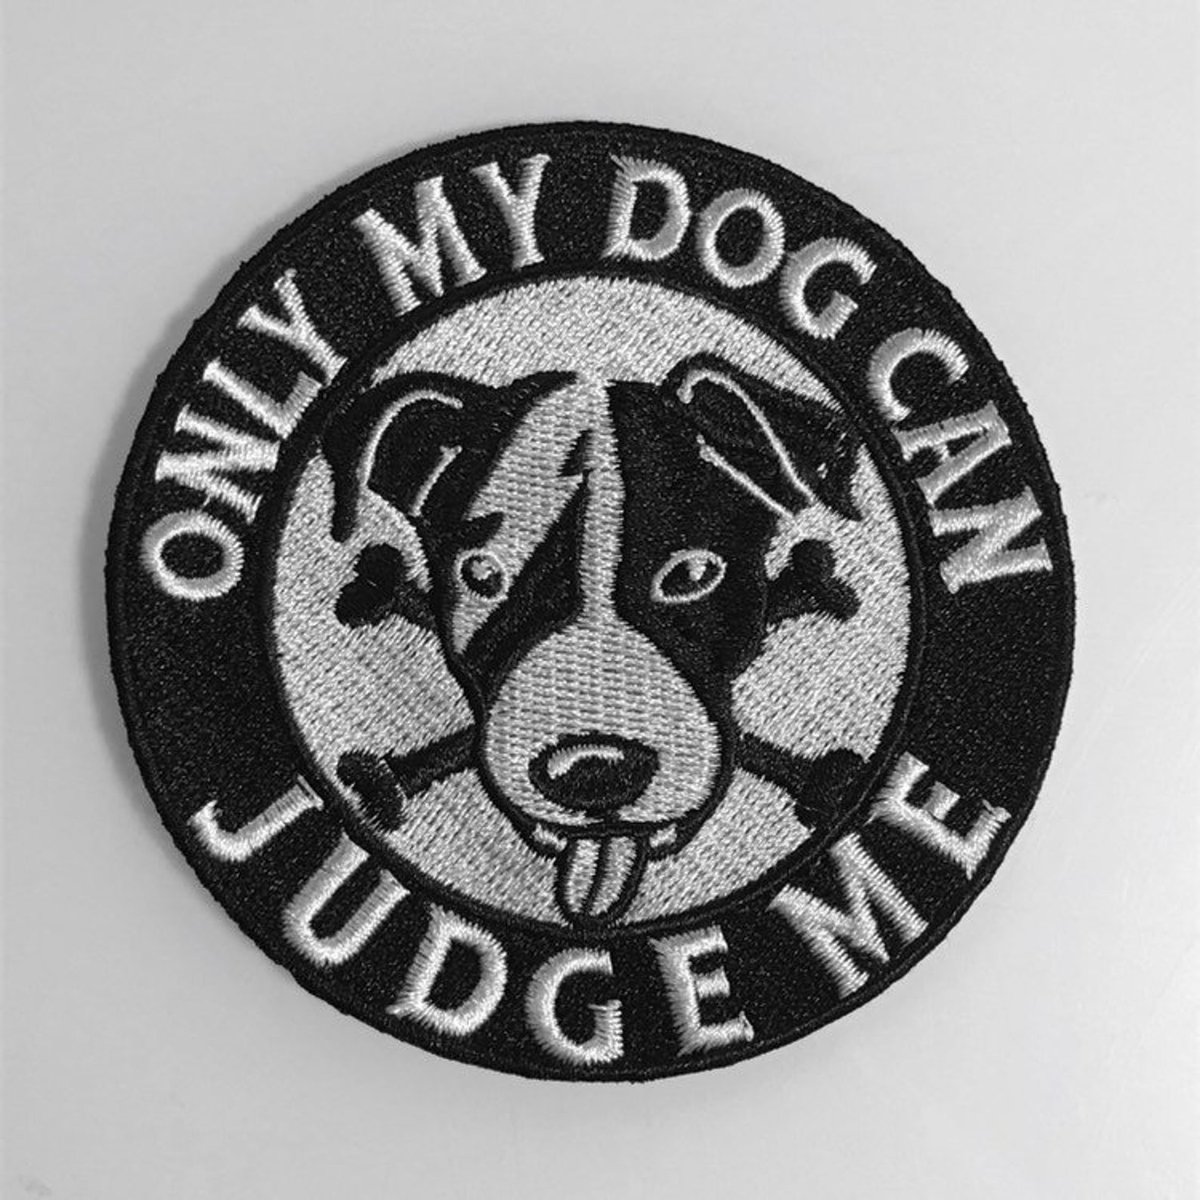 Image of Dog Lover embroidered patch